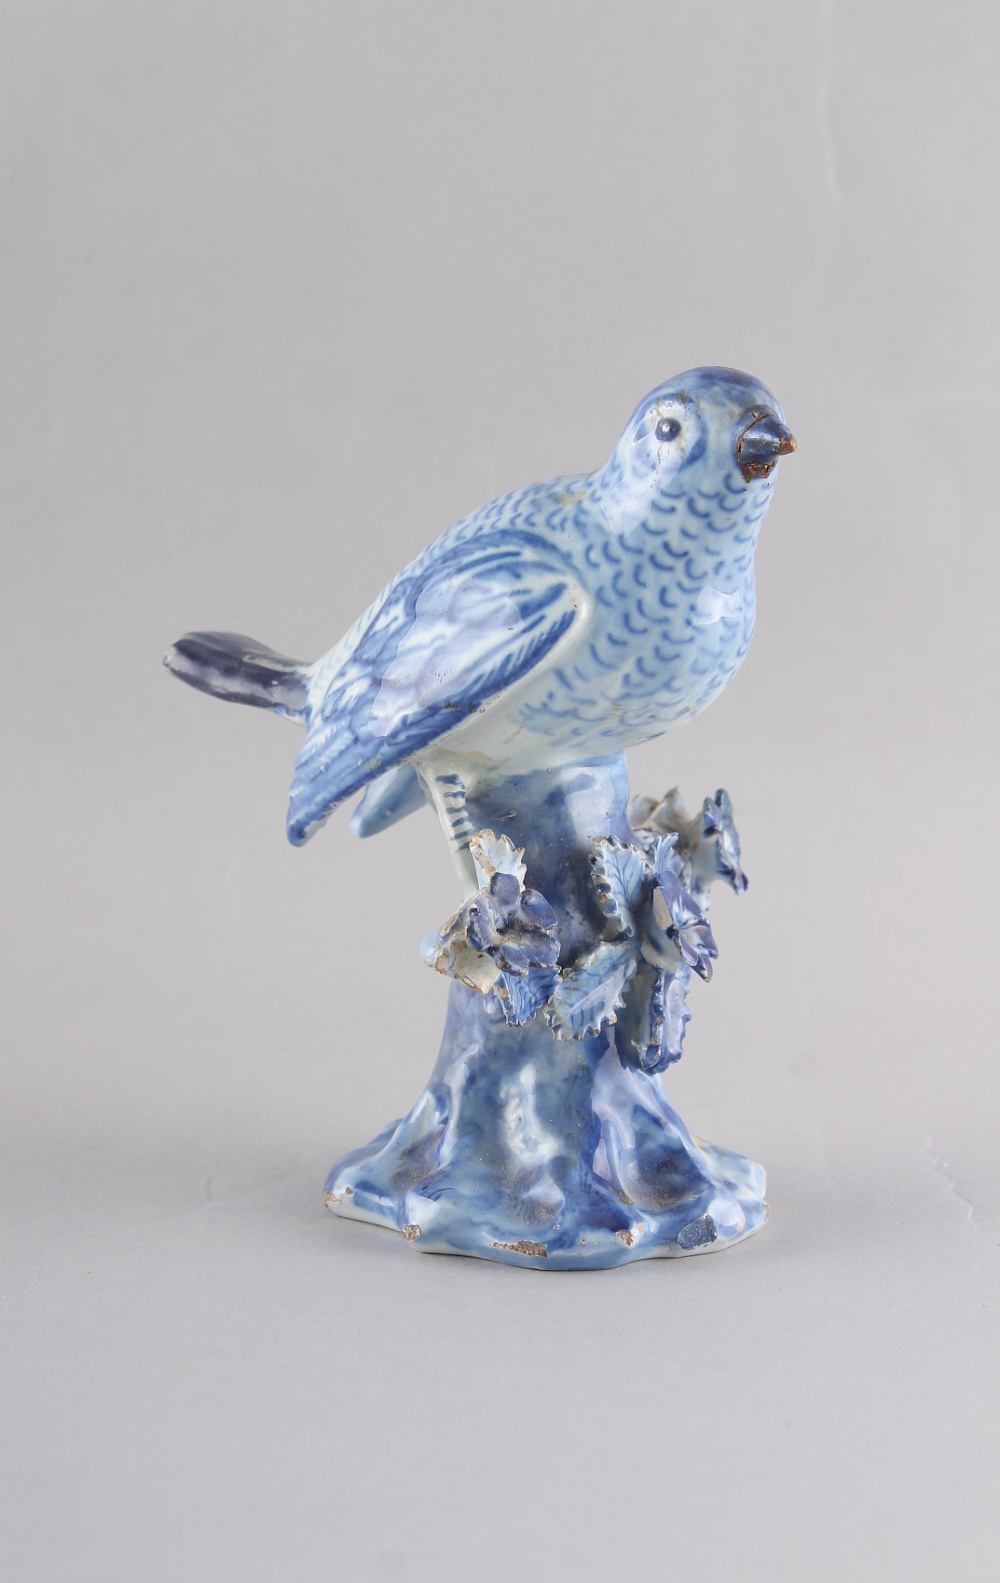 Property of a deceased estate - a late 18th century Dutch Delft blue & white model of a bird perched